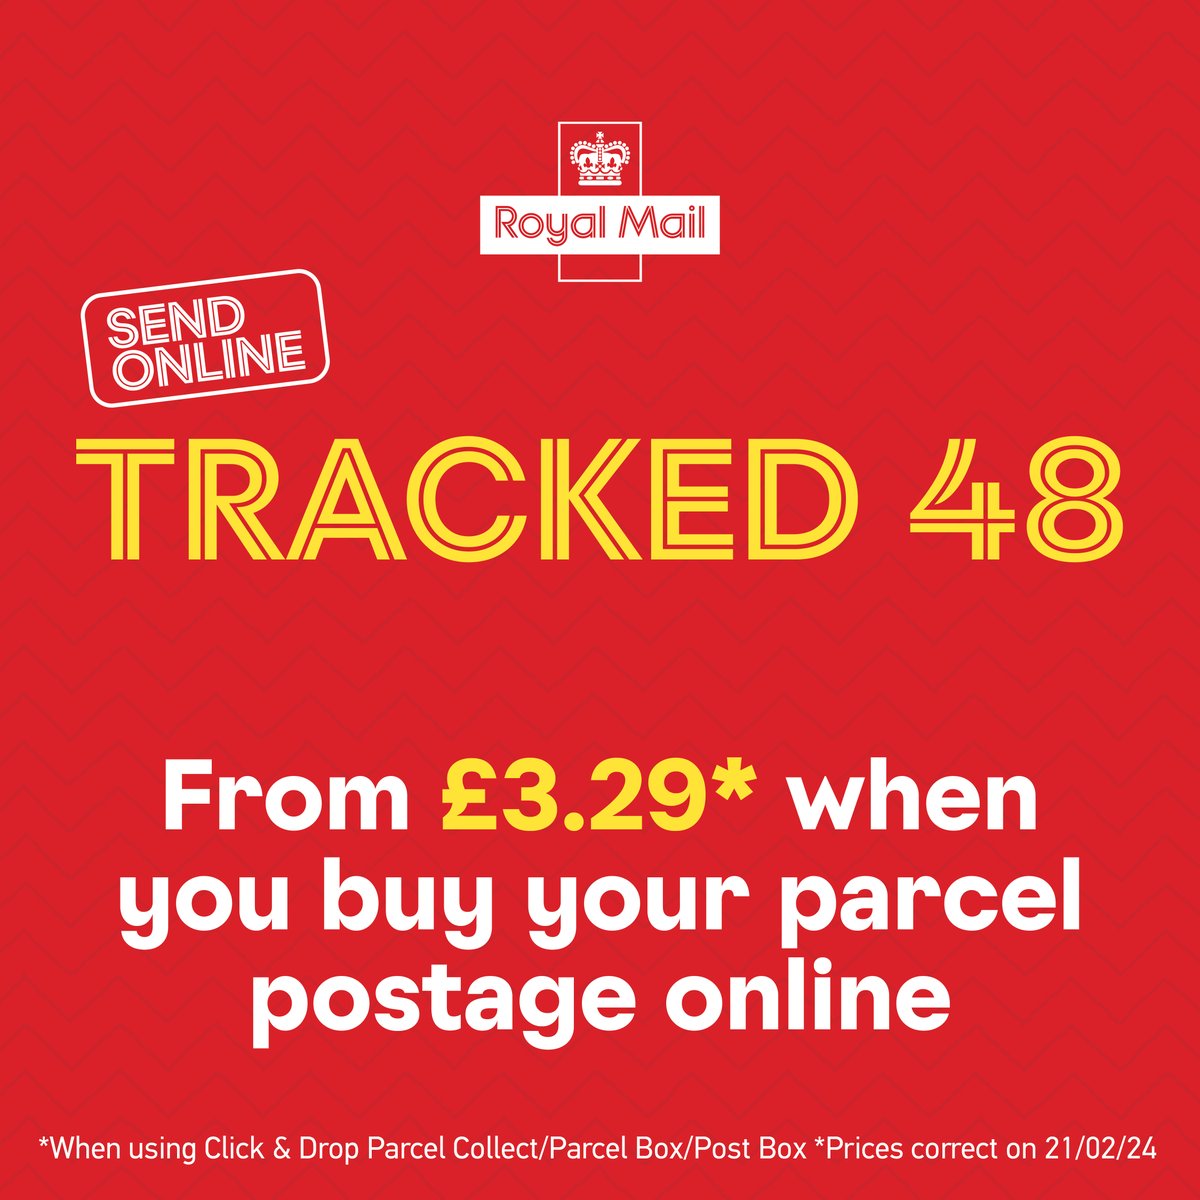 Get a free parcel collection when you buy your Tracked 48 postage online. Book now: ms.spr.ly/6011cc9vb